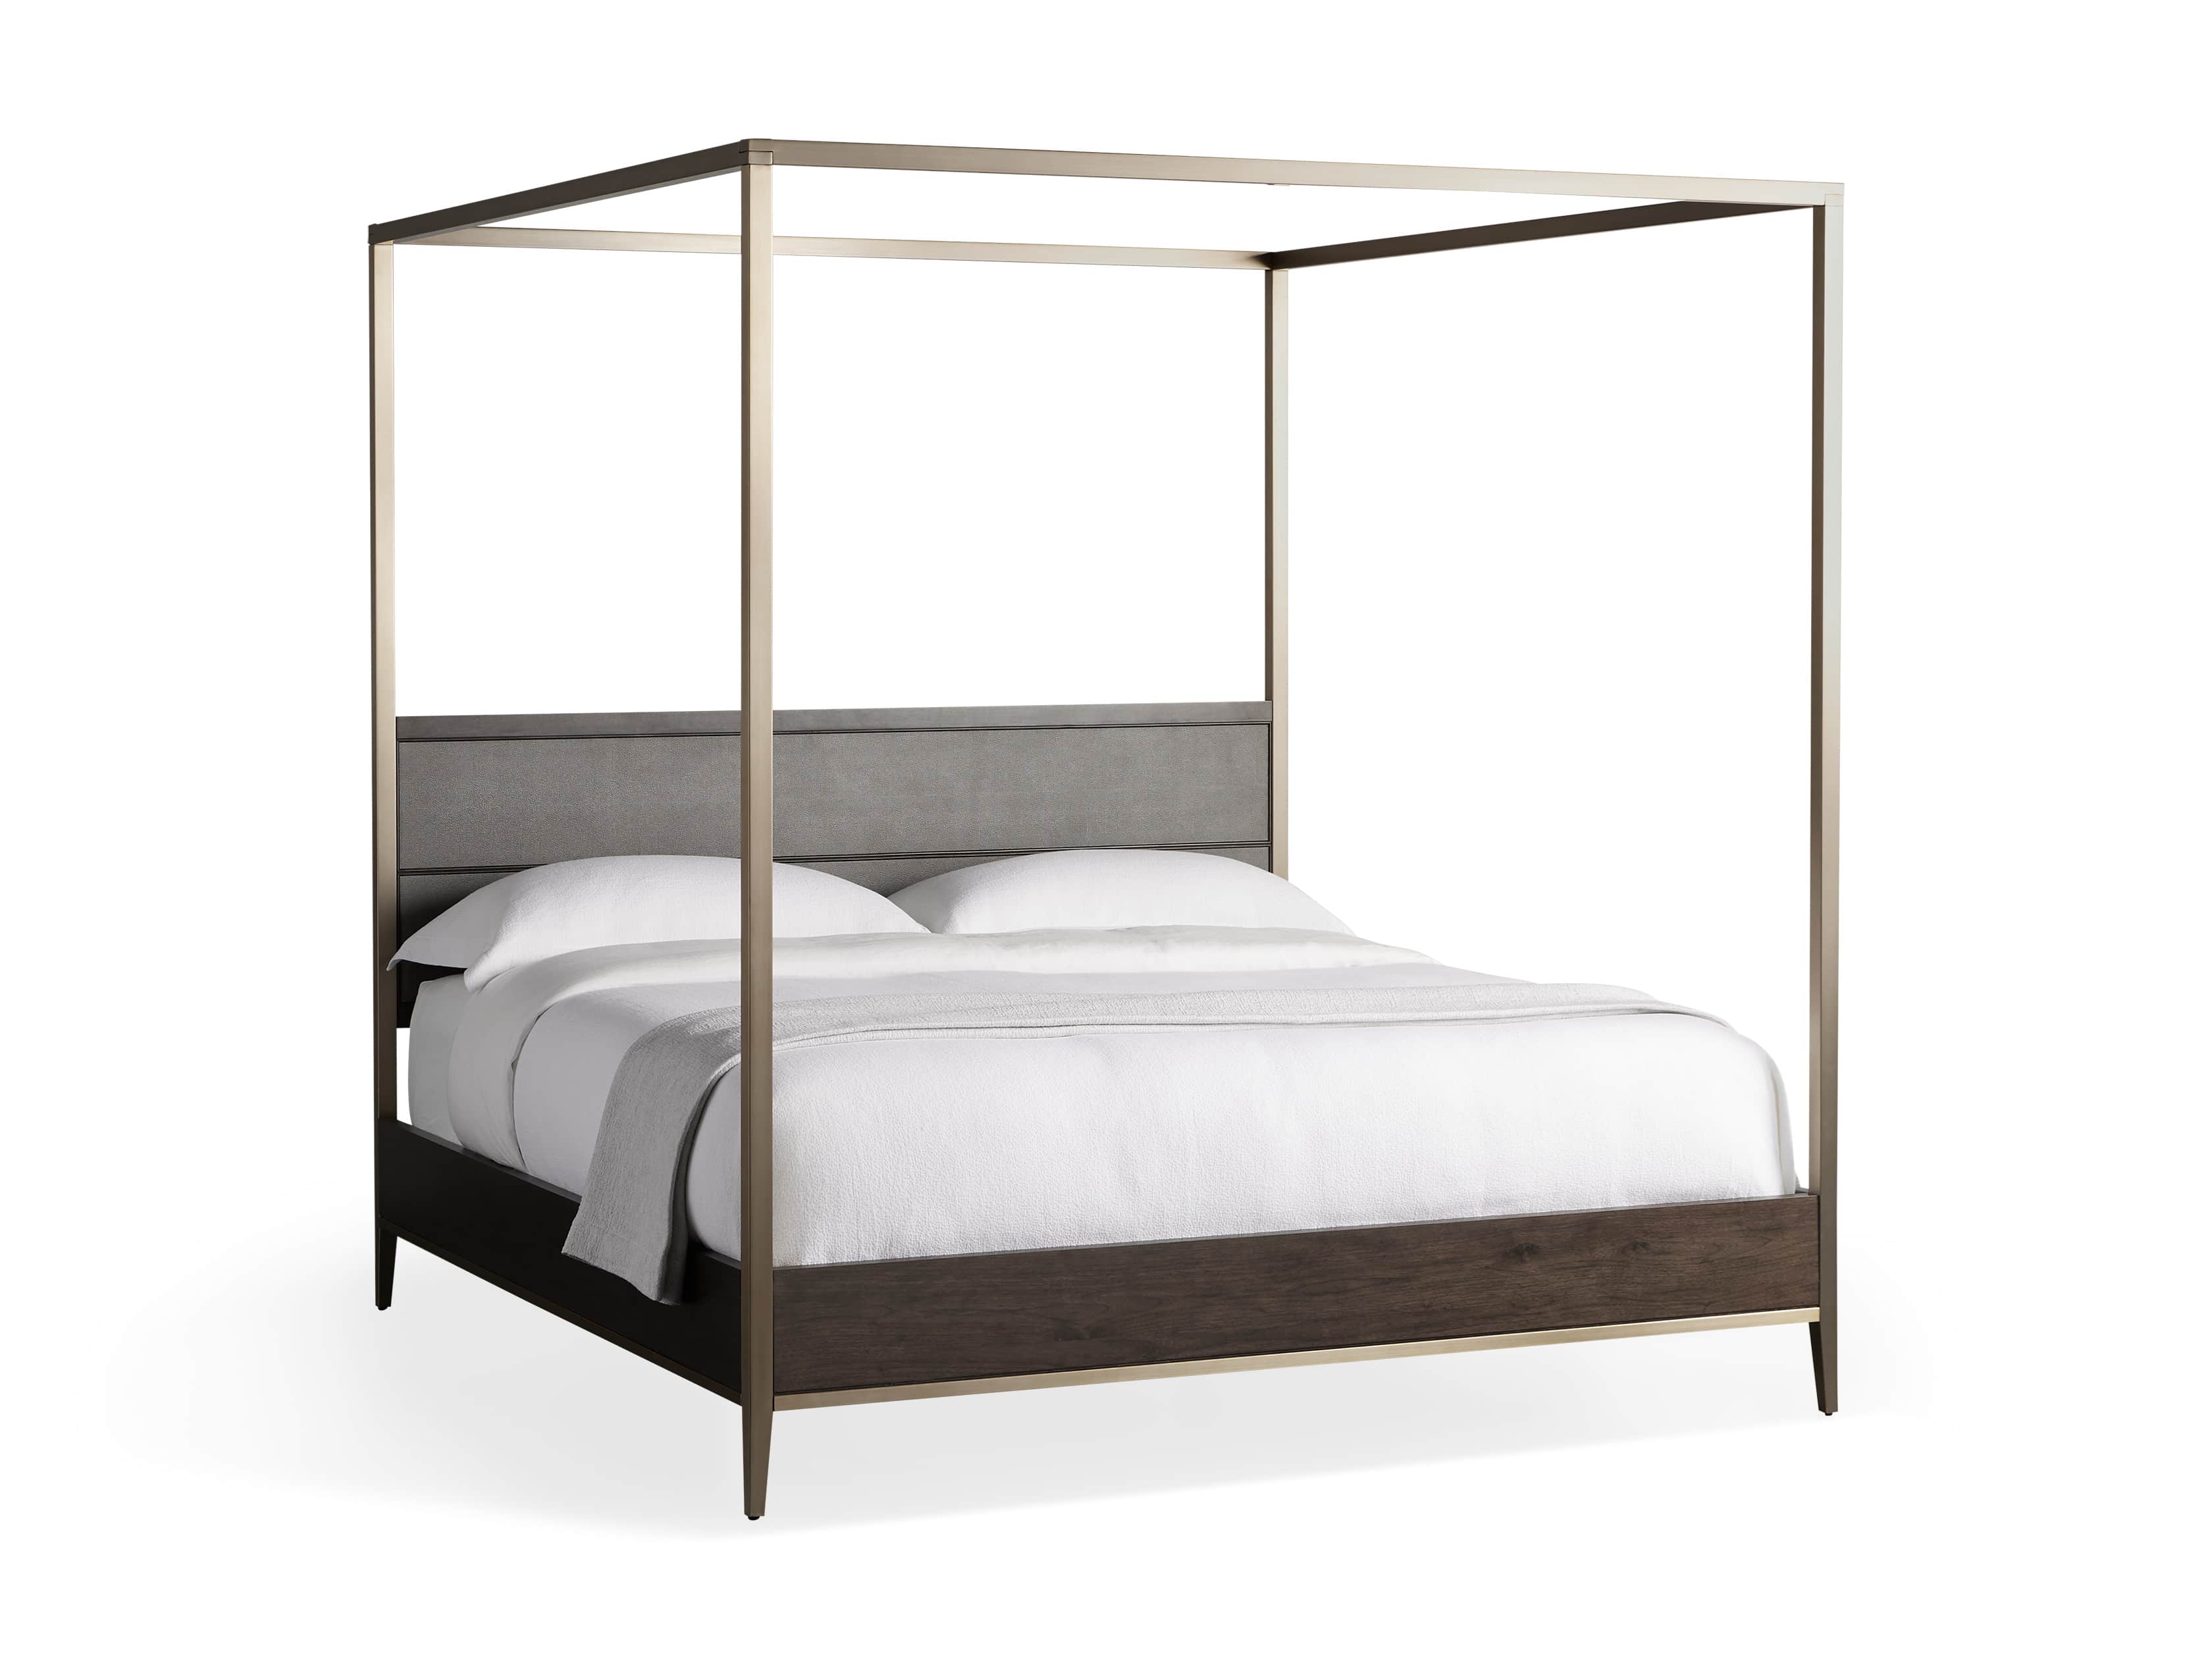 Malone Canopy Bed Arhaus, Queen Four Poster Bed Canopy